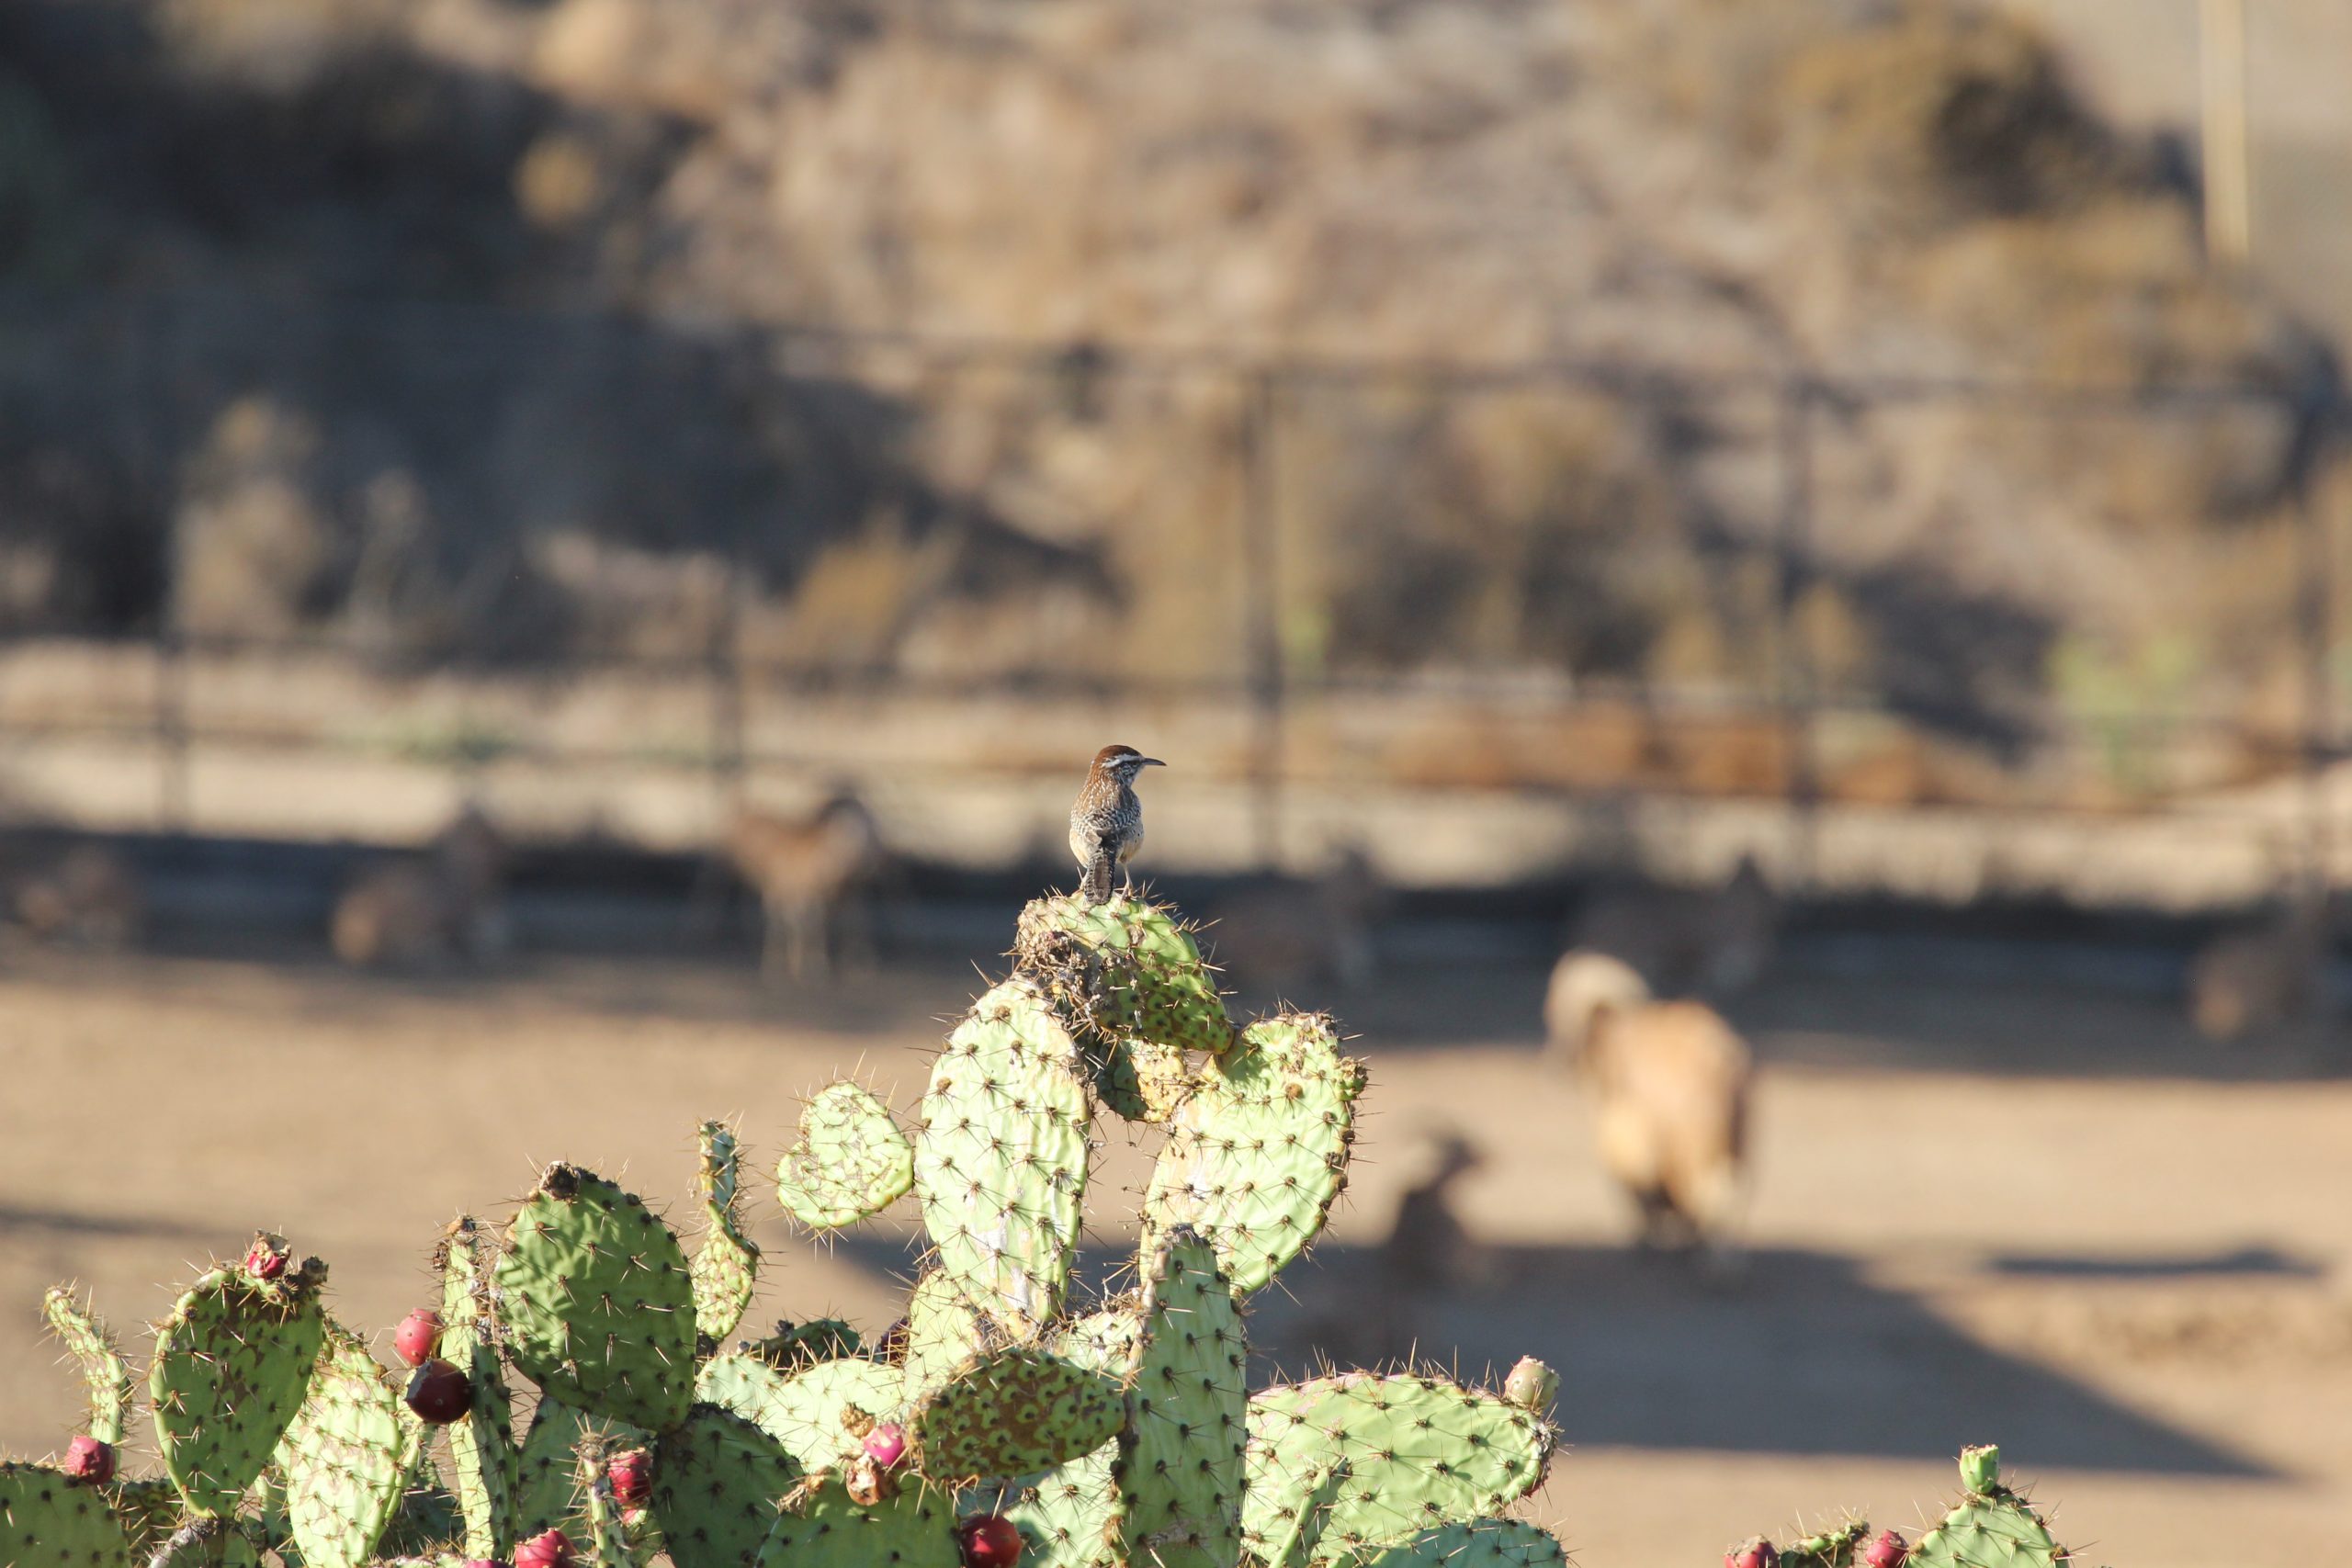 Rare local species, such as coastal cactus wren, can be found adjacent to exotic hoofstock kept for breeding, both species supported by the conservation efforts of San Diego Zoo Global.